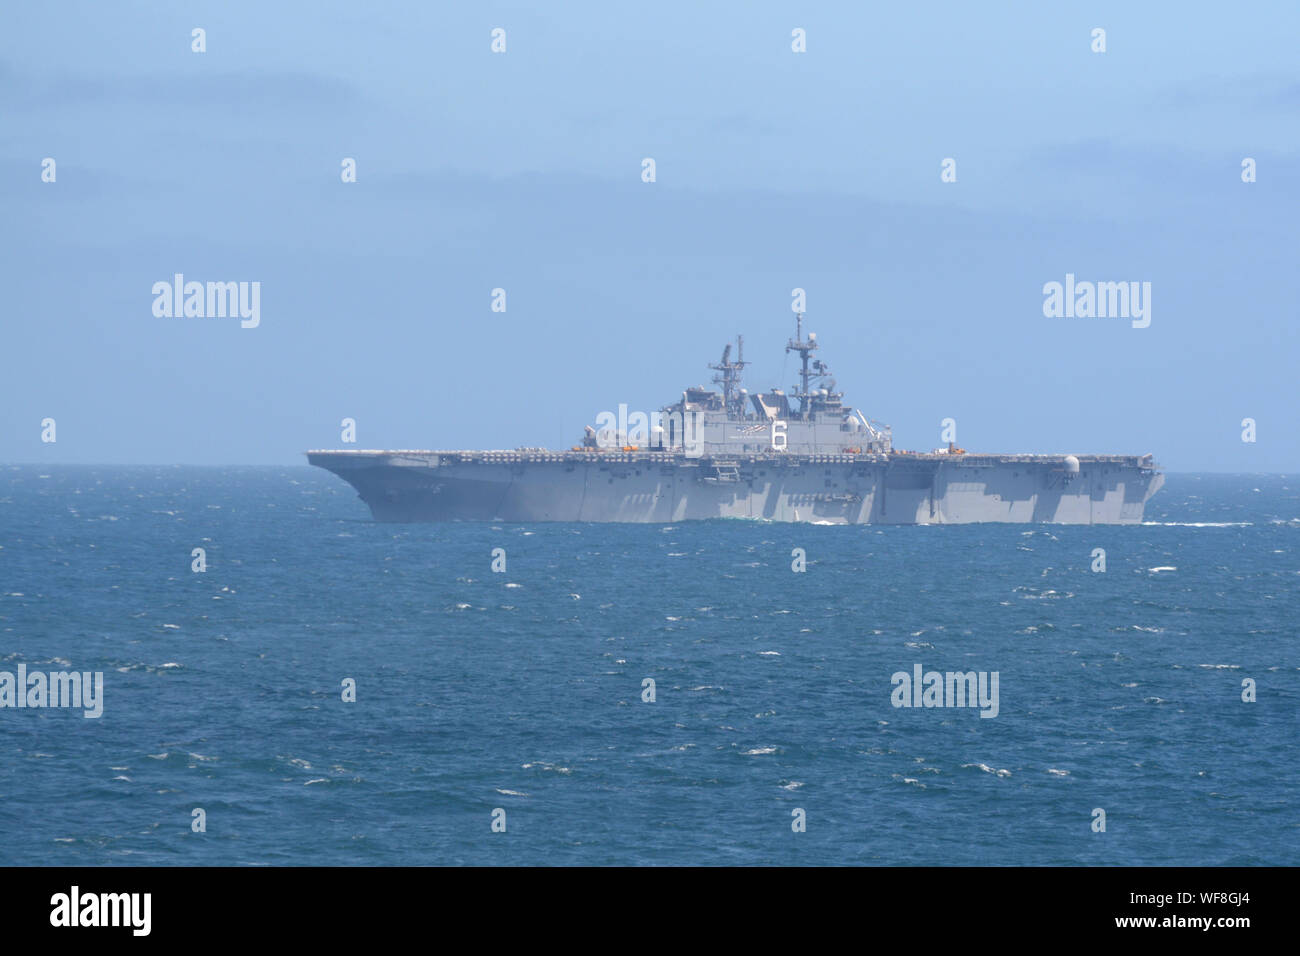 190820-N-XN177-0102 PACIFIC OCEAN (Aug. 20, 2019) – The amphibious assault ship USS America (LHA 6) prepares to come along side the dock landing ship USS Comstock (LSD 45) during a replenishment at sea evolution. Comstock is currently underway conducting routine operations. This year USS Comstock will participate in the U.S. Navy Fleet Week in Los Angeles. (U.S. Navy Photo by Mass Communication Specialist 1st Class Peter Burghart/Released) Stock Photo